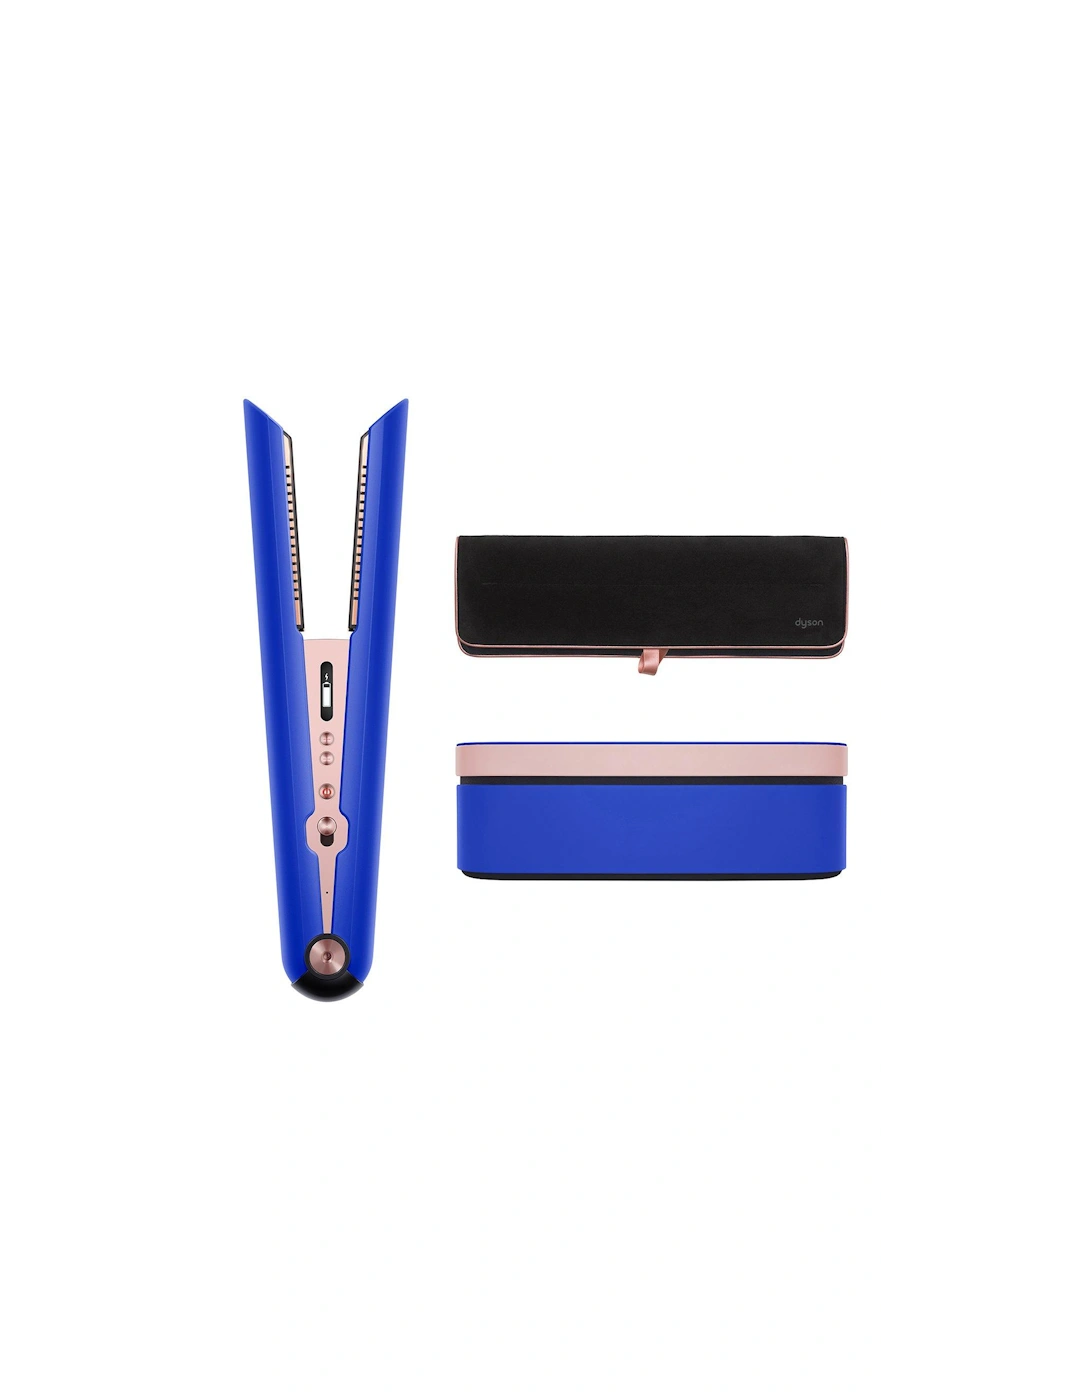 Corrale Hair Straightener with Complimentary Gift Case - Blue Blush, 2 of 1